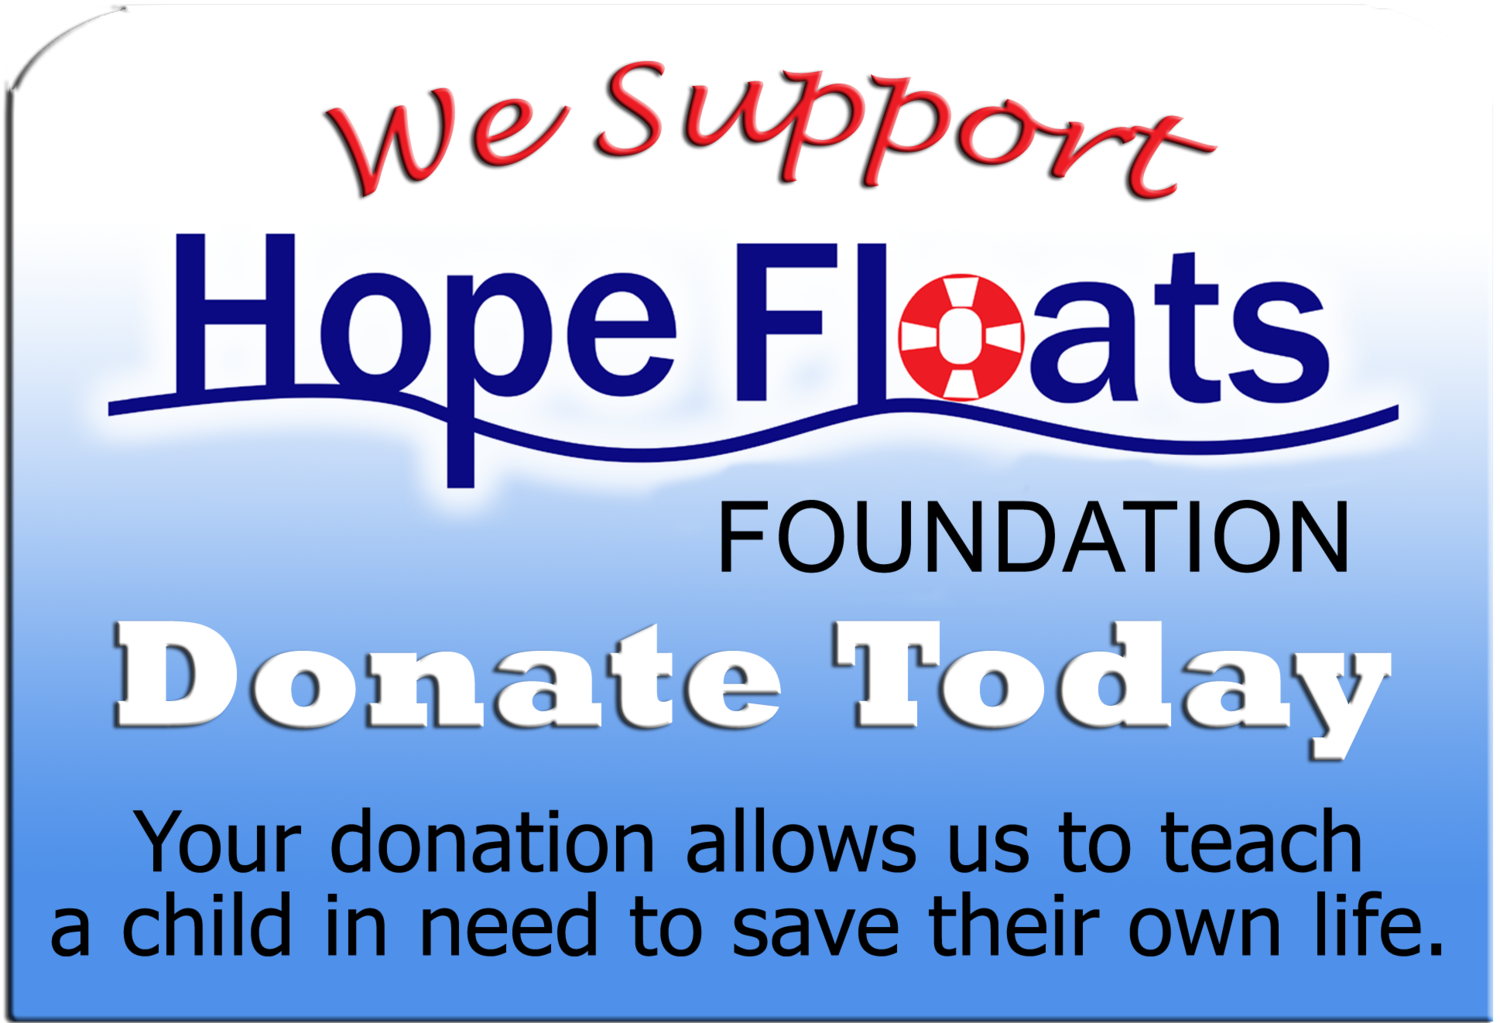 We support Hope Floats Foundation. Donate today. Your donation allows us to teach a child in need to save their own life.